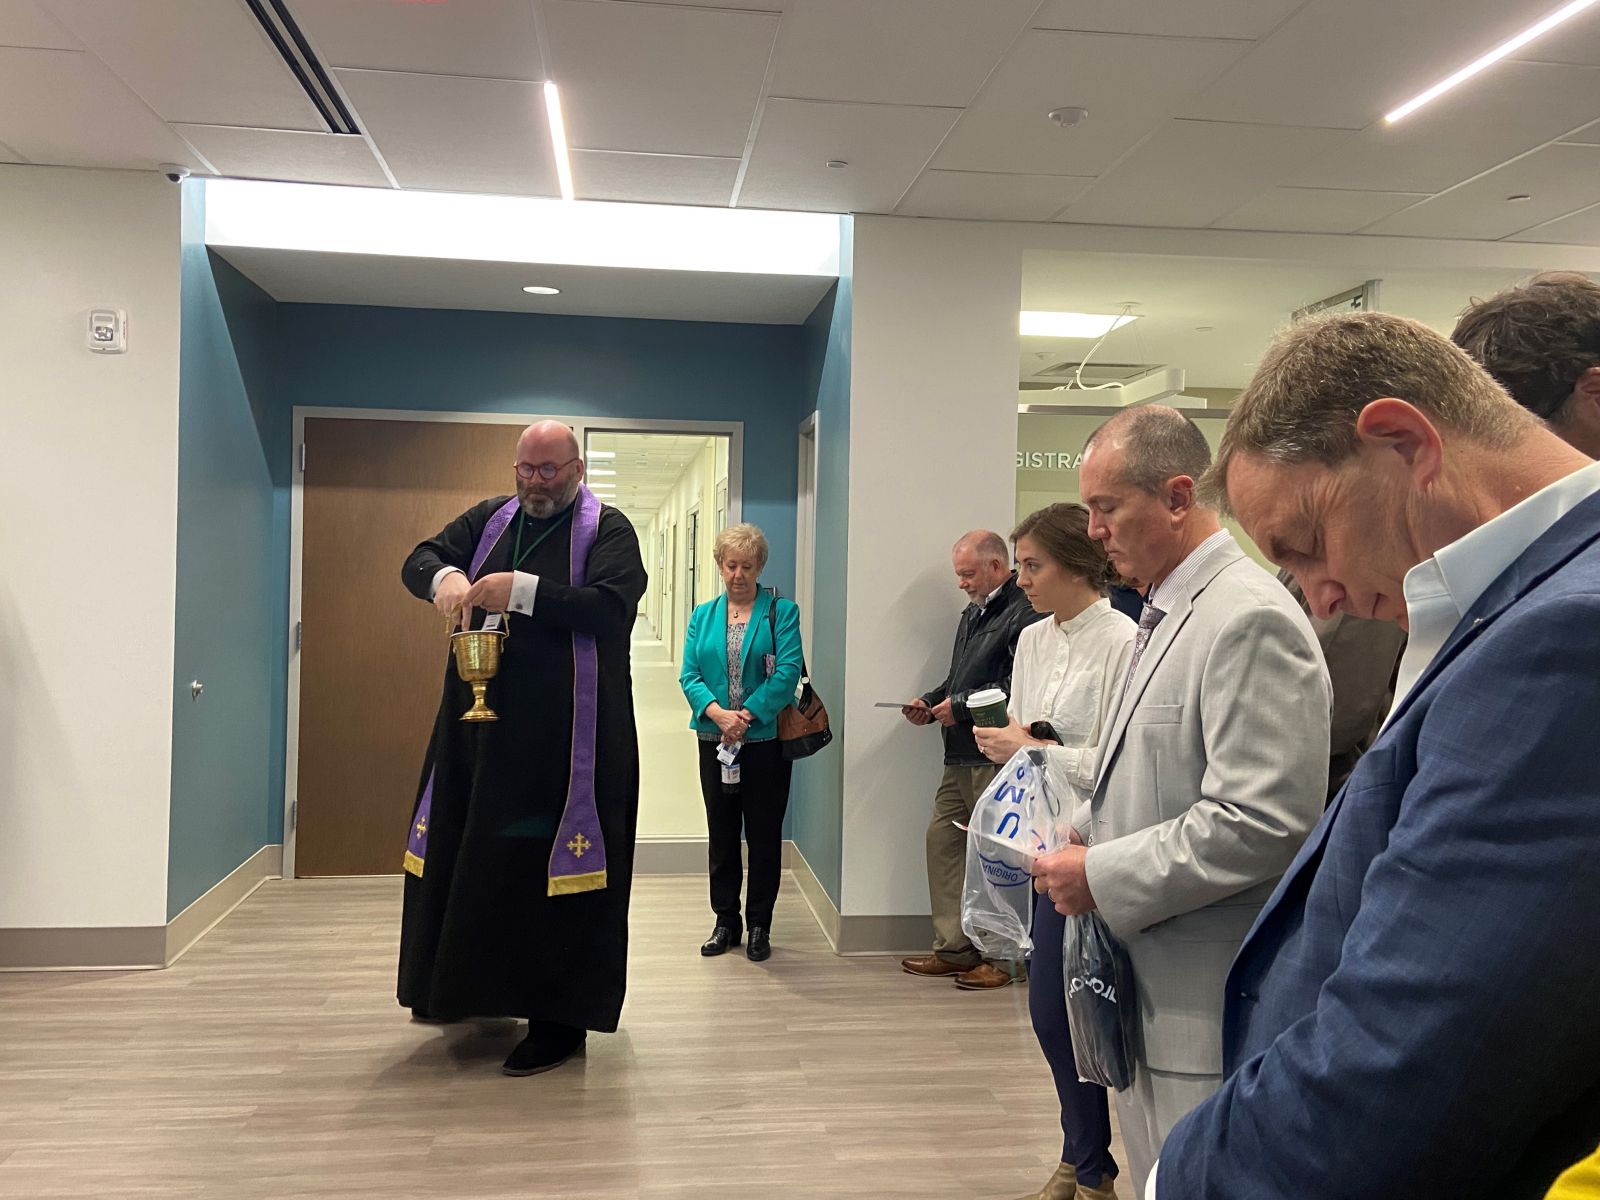 A priest blesses the new facility during the March 31 groundbreaking. (Photo/Provided)